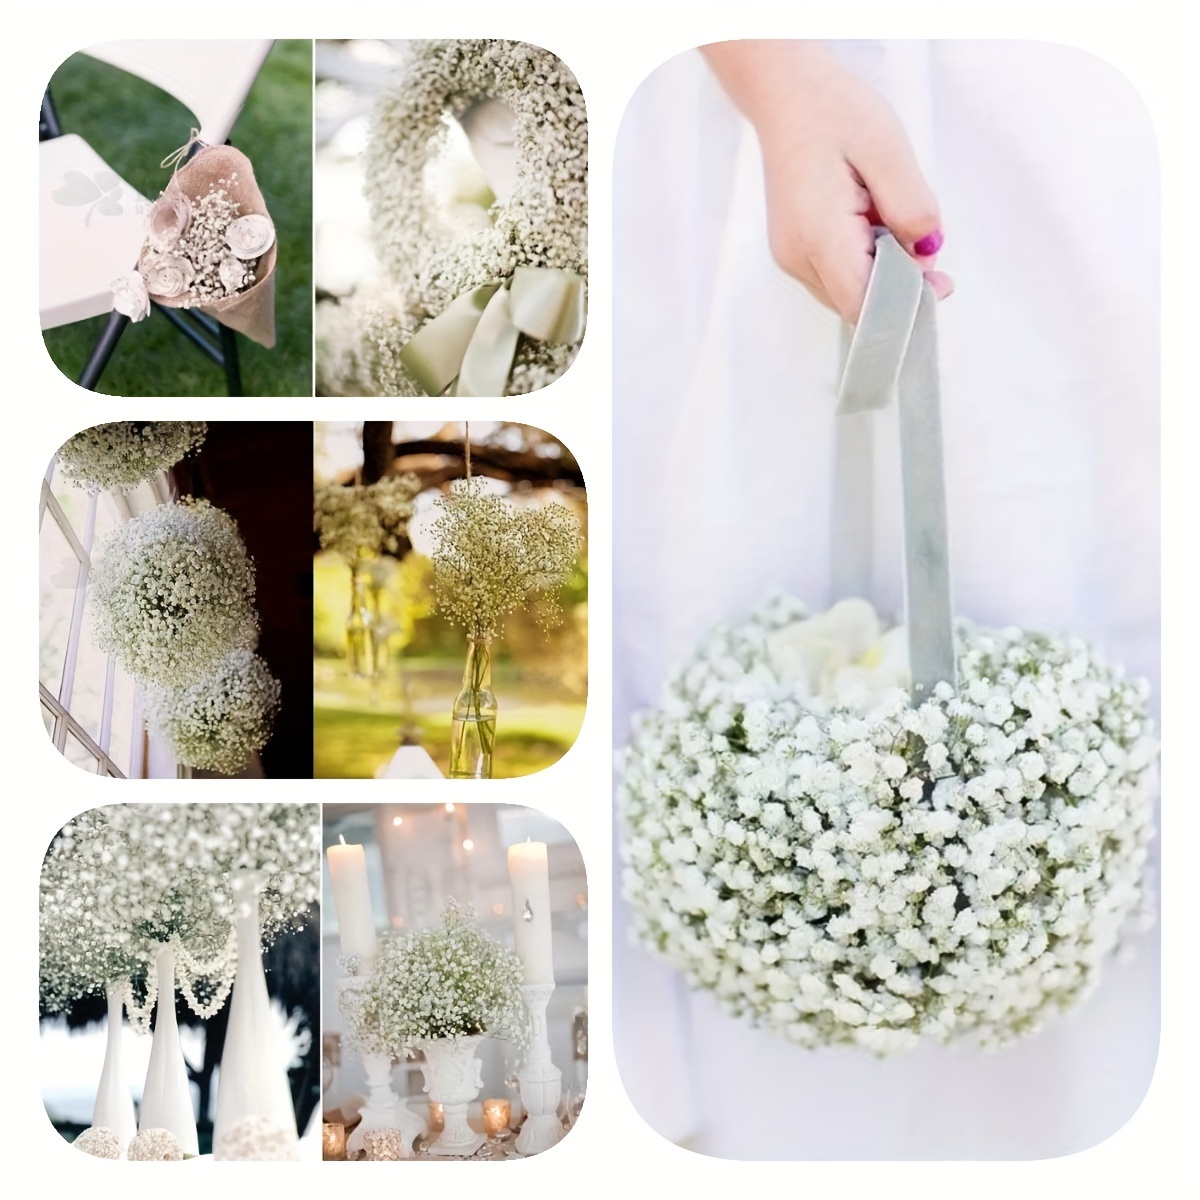 Dried Babys Breath Flowers Bouquet-17 Inch 2500+ Ivory Red Dried Flowers,  Natural Dry Flowers for Wedding Flowers, Table Vase Decor, DIY Wreath